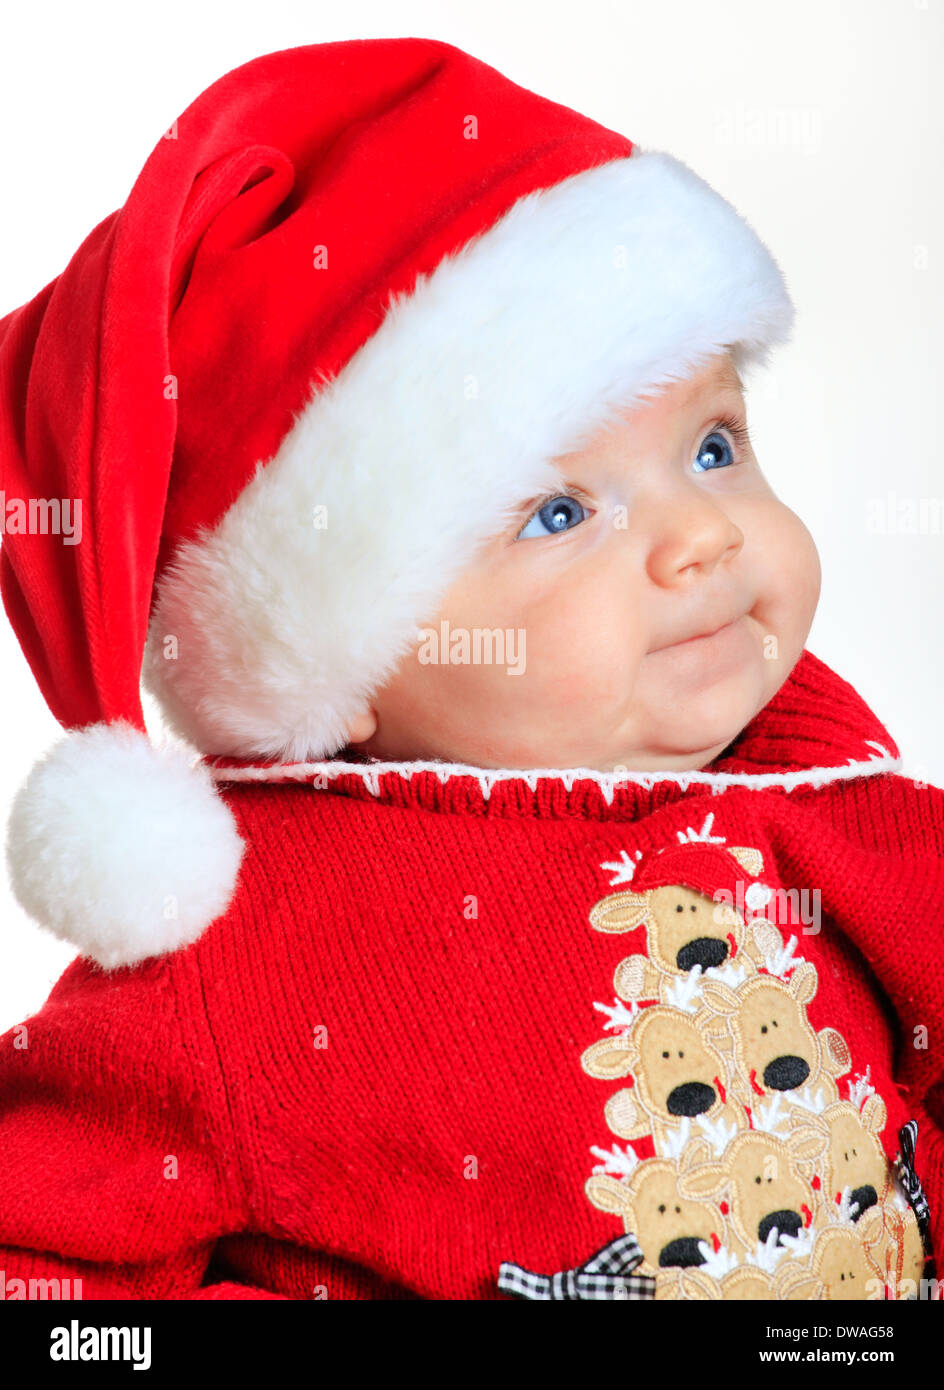 Baby girl wearing a Santa Claus suit and hat Stock Photo